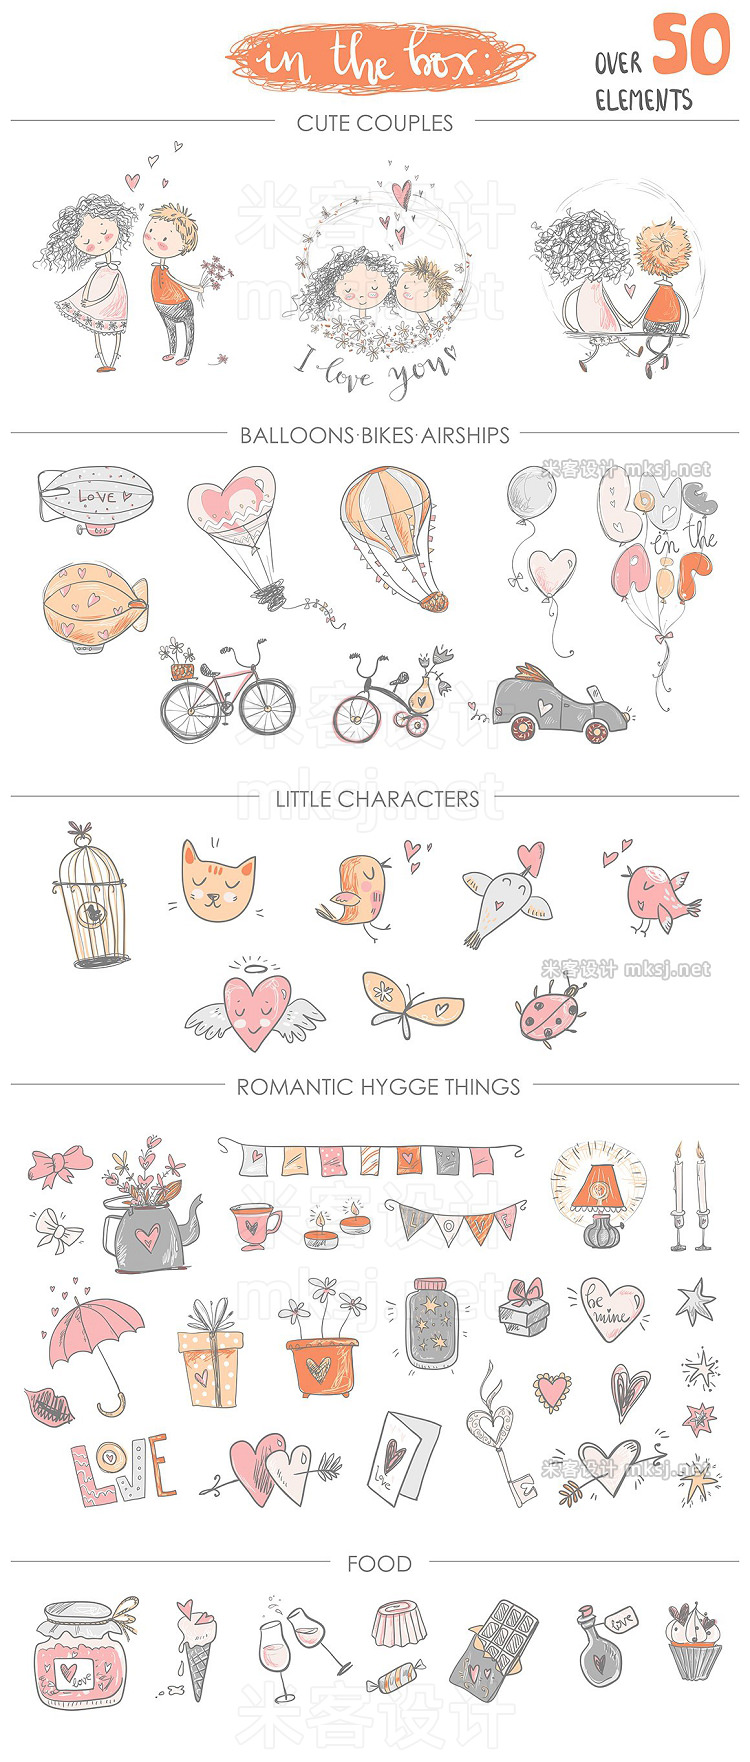 png素材 Fall in love ROMANTIC graphic KIT